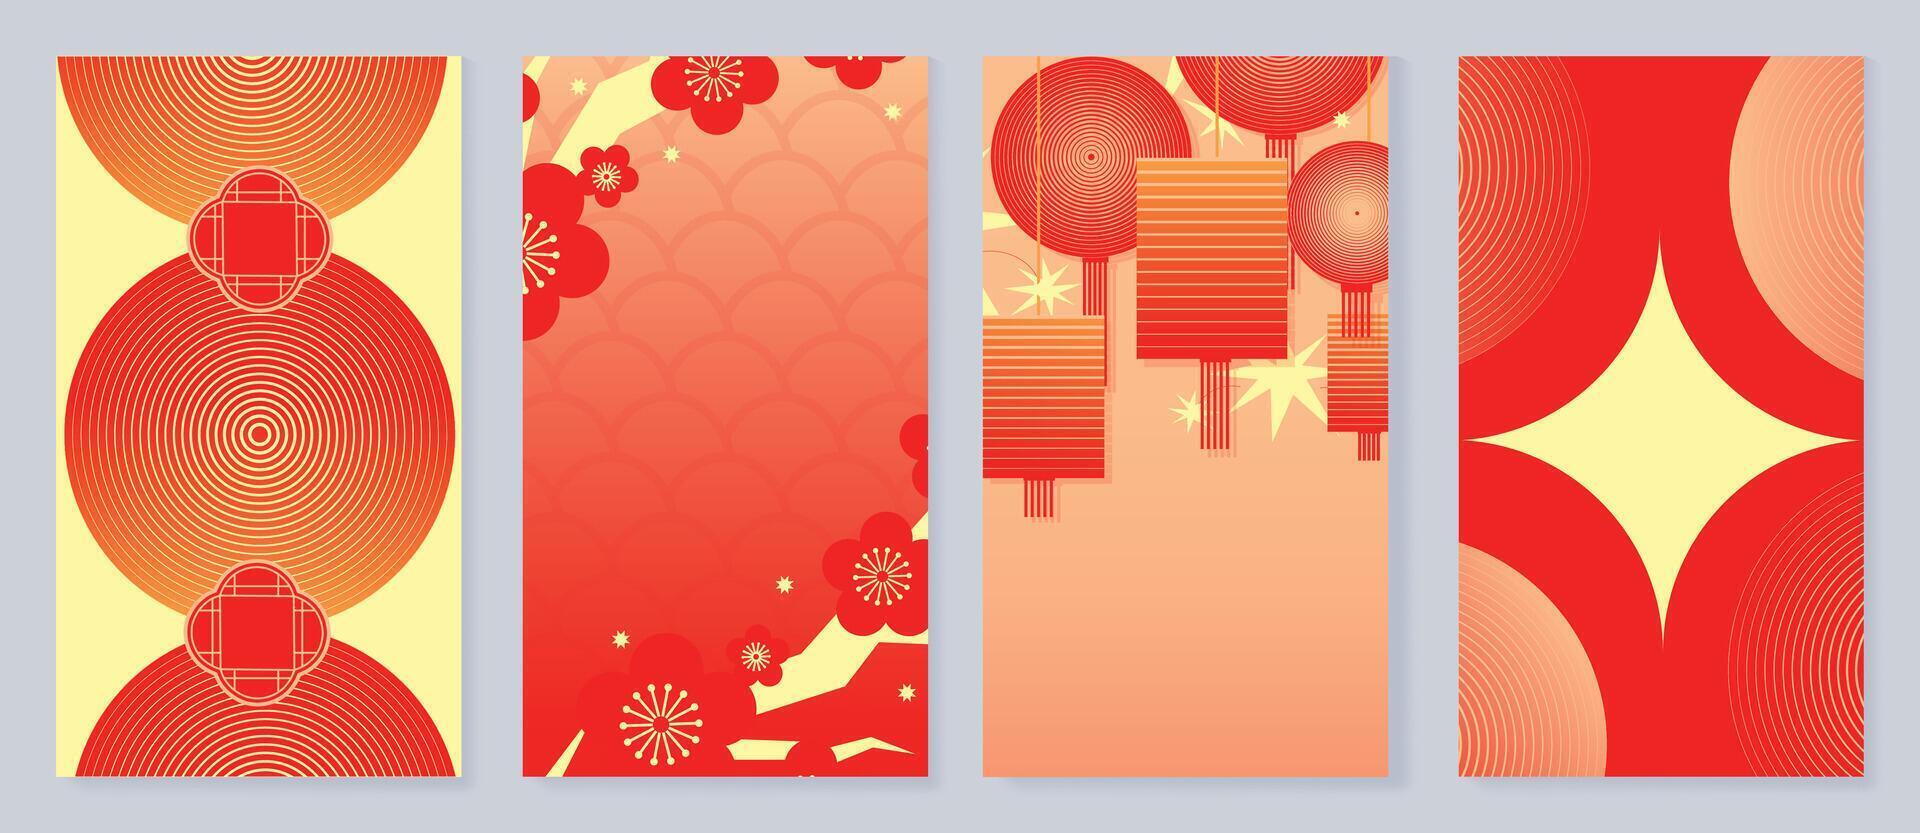 Chinese New Year cover background vector. Luxury background design with chinese pattern, lantern, flower, sparkle, line. Modern oriental illustration for cover, banner, website, social media. vector